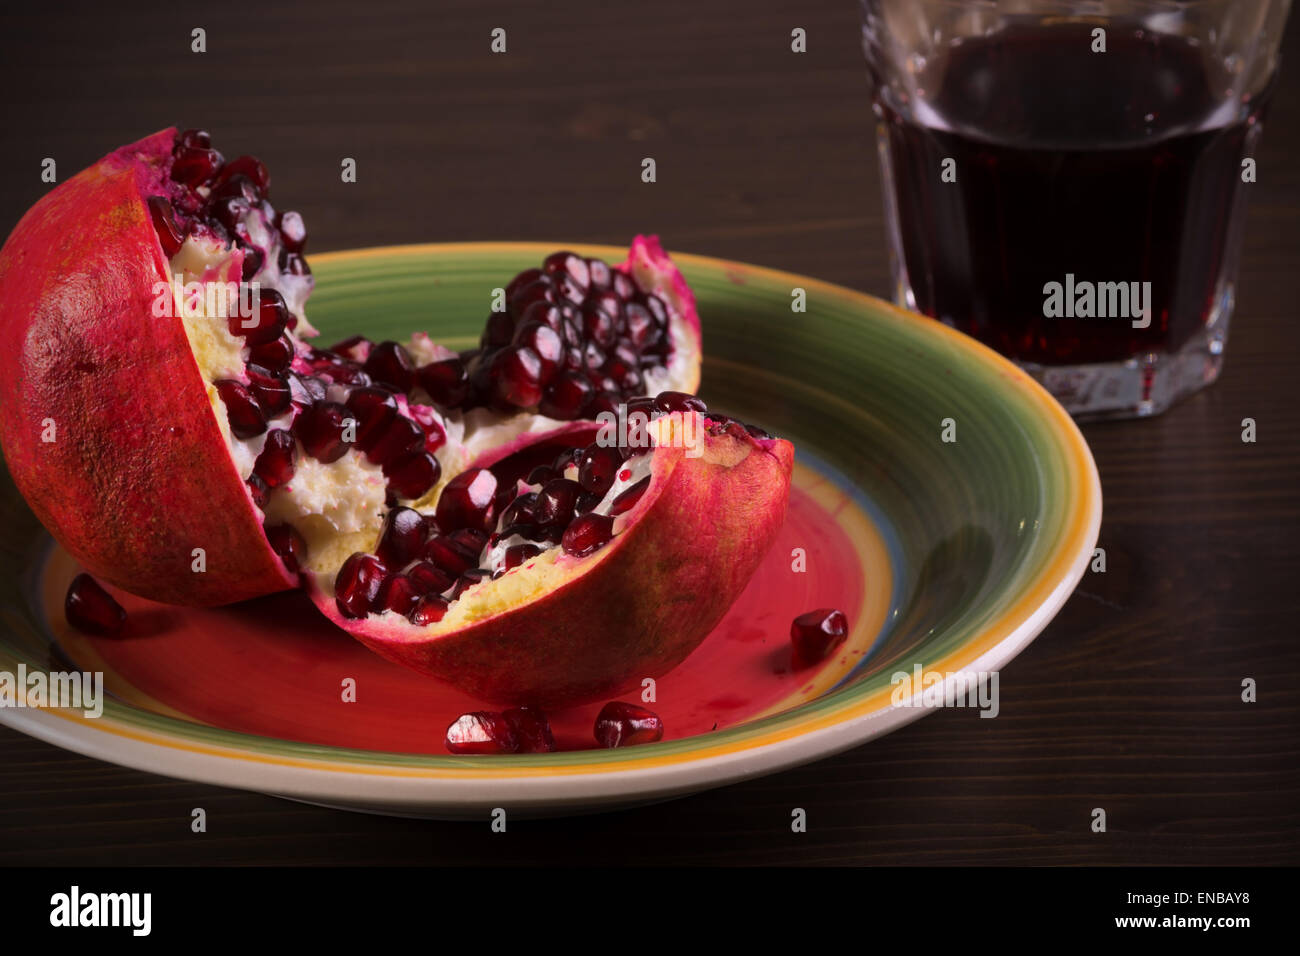 Ripe pomegranate fruit and a glass of juice on wood Stock Photo